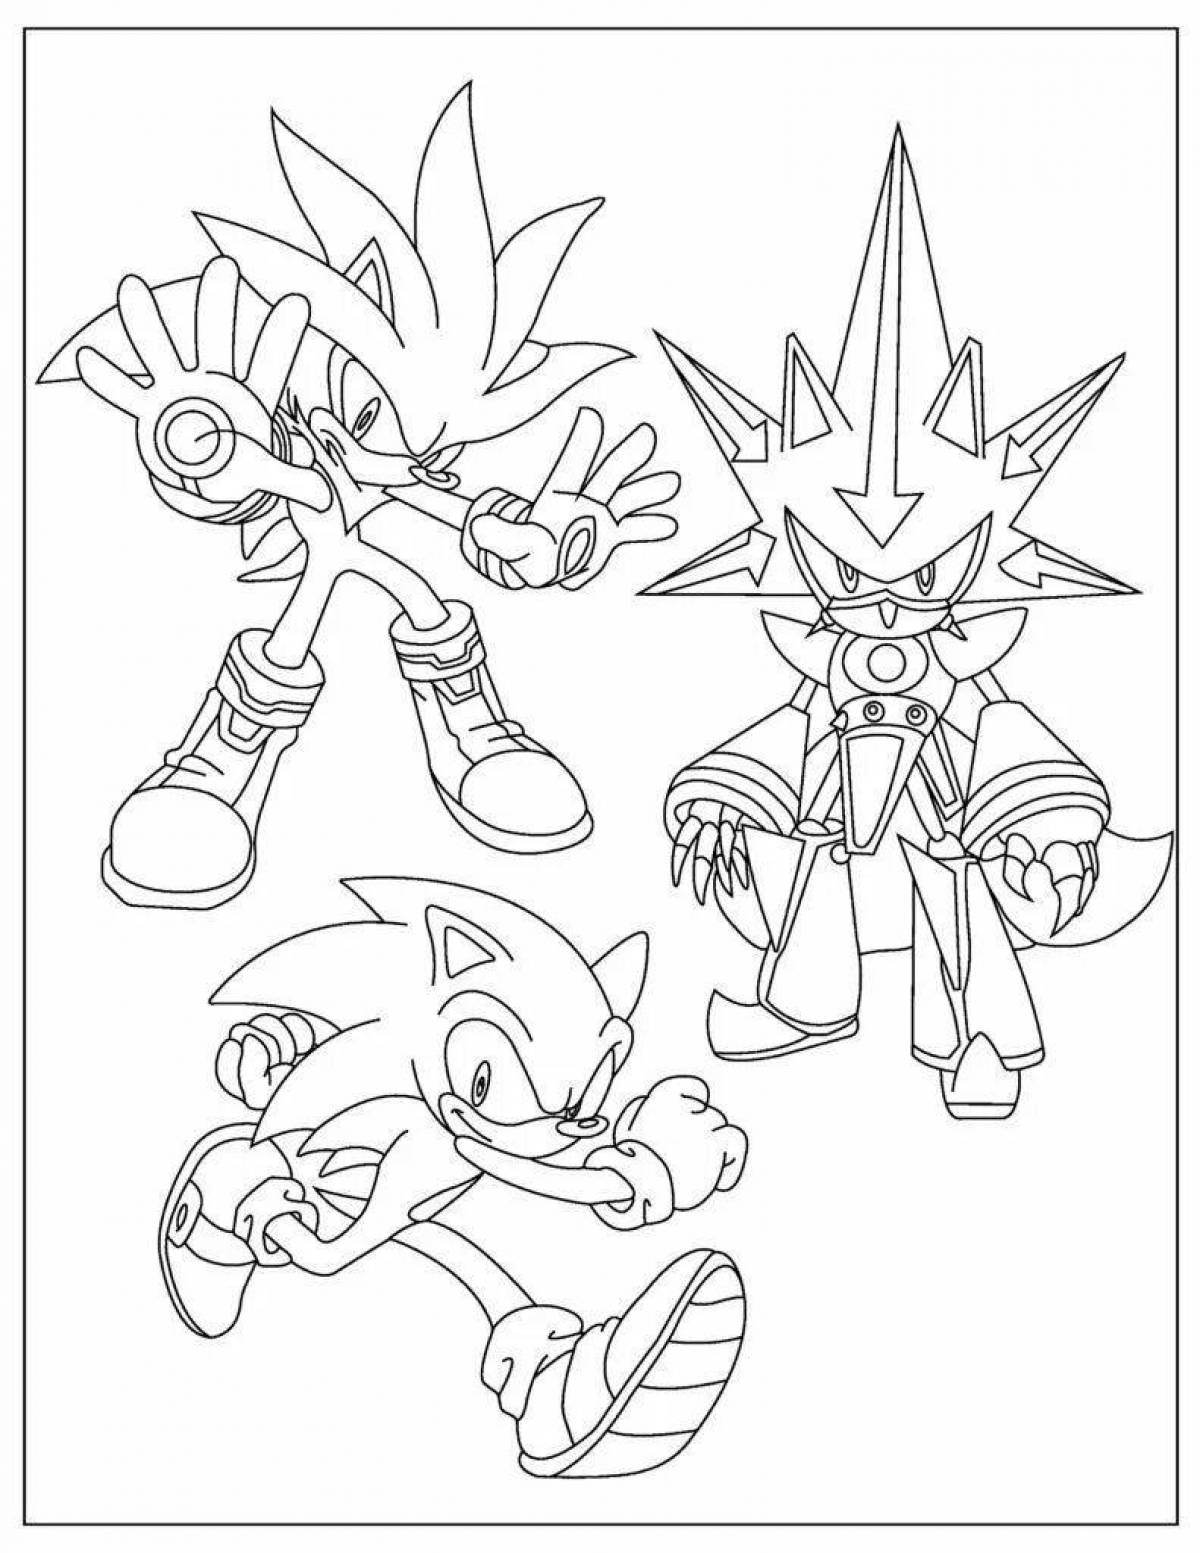 Colorful sonic shredder coloring page